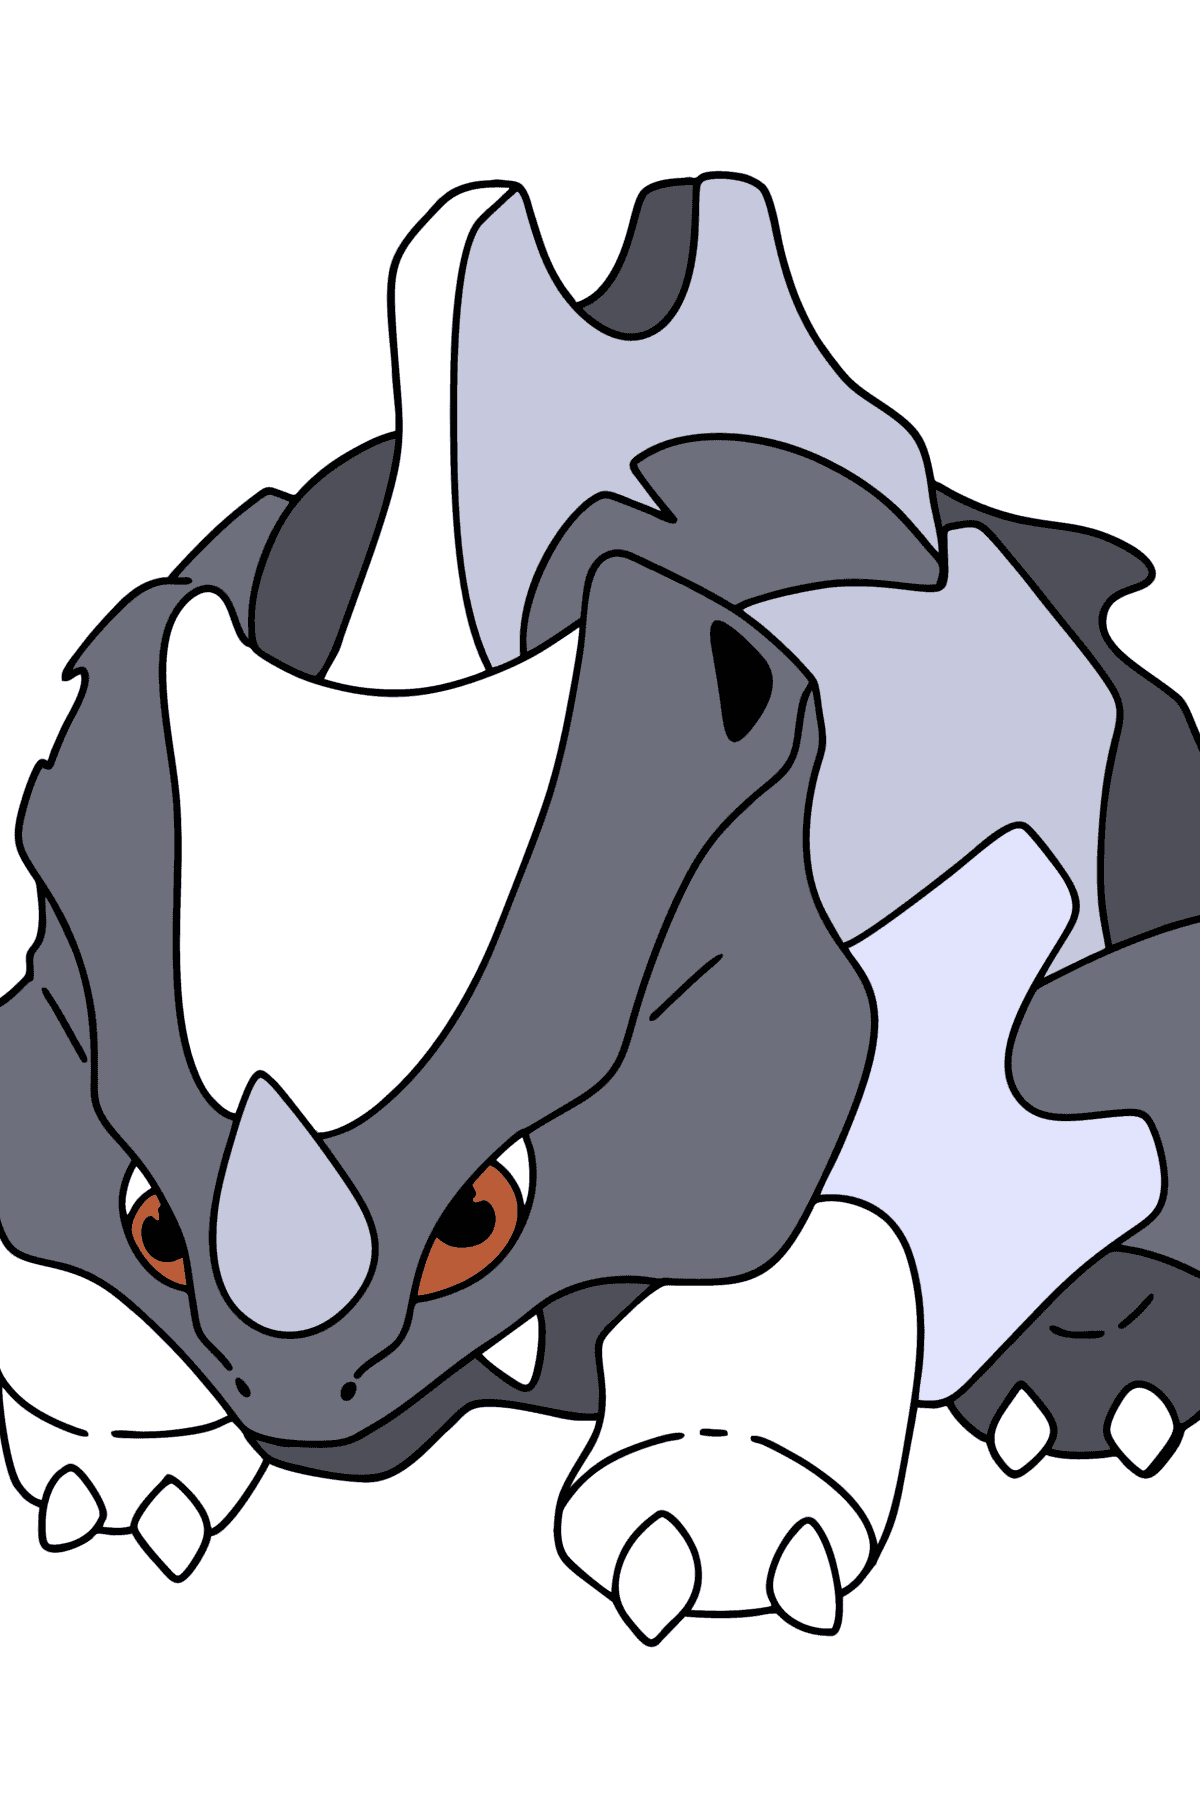 Coloring page Pokemon Go Rhyhorn - Coloring Pages for Kids